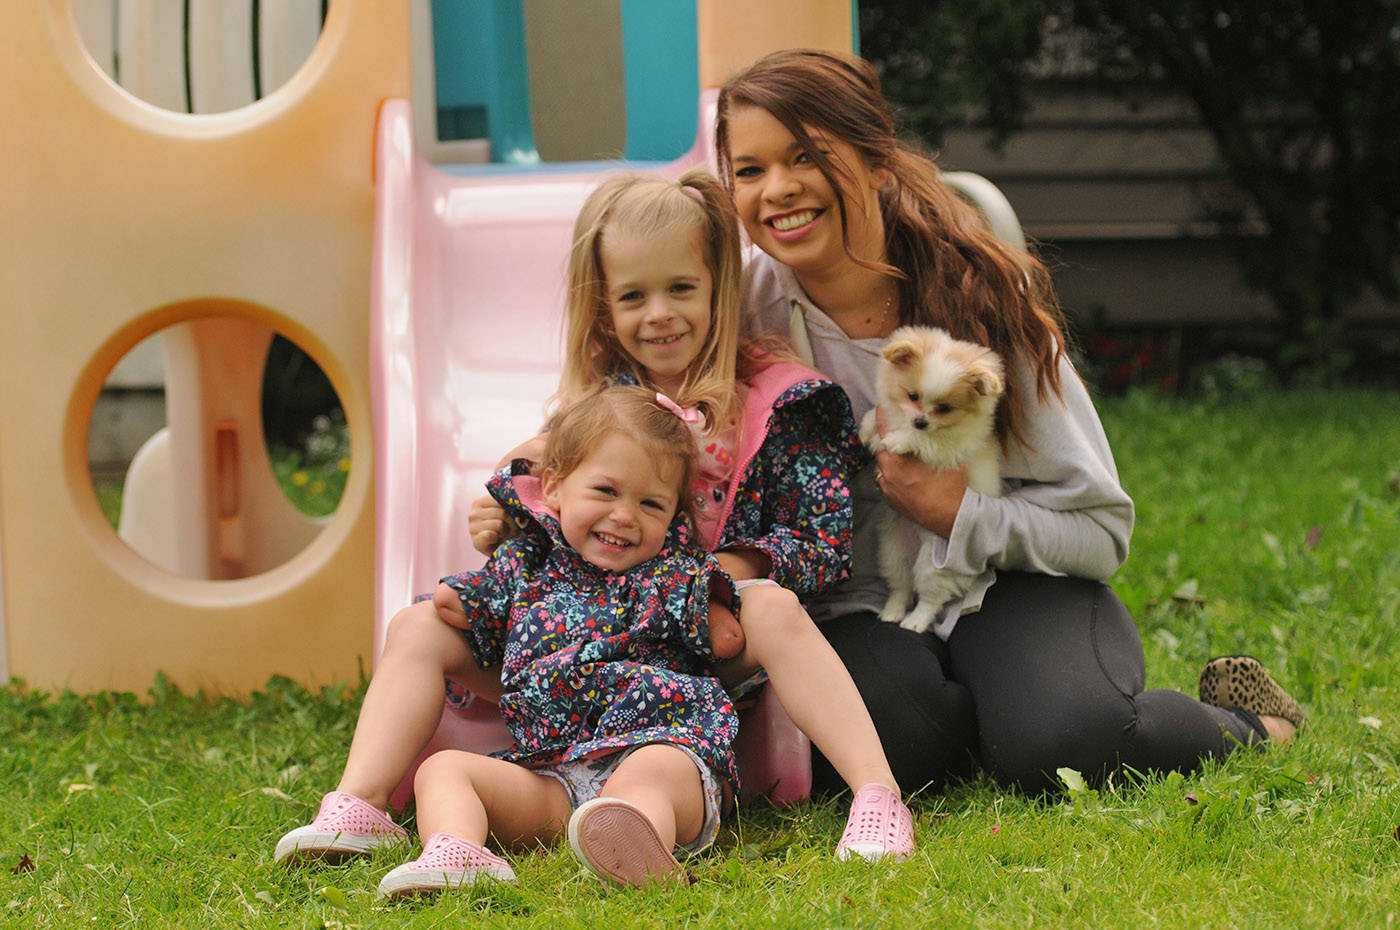 The McLeod family – Ivy, 2, Elena, 5, and mom Vanessa – are seen with their new puppy Lucky outside their home in Chilliwack on Thursday, June 10, 2021. Not pictured is husband/dad Sean McLeod. (Jenna Hauck/ Chilliwack Progress)